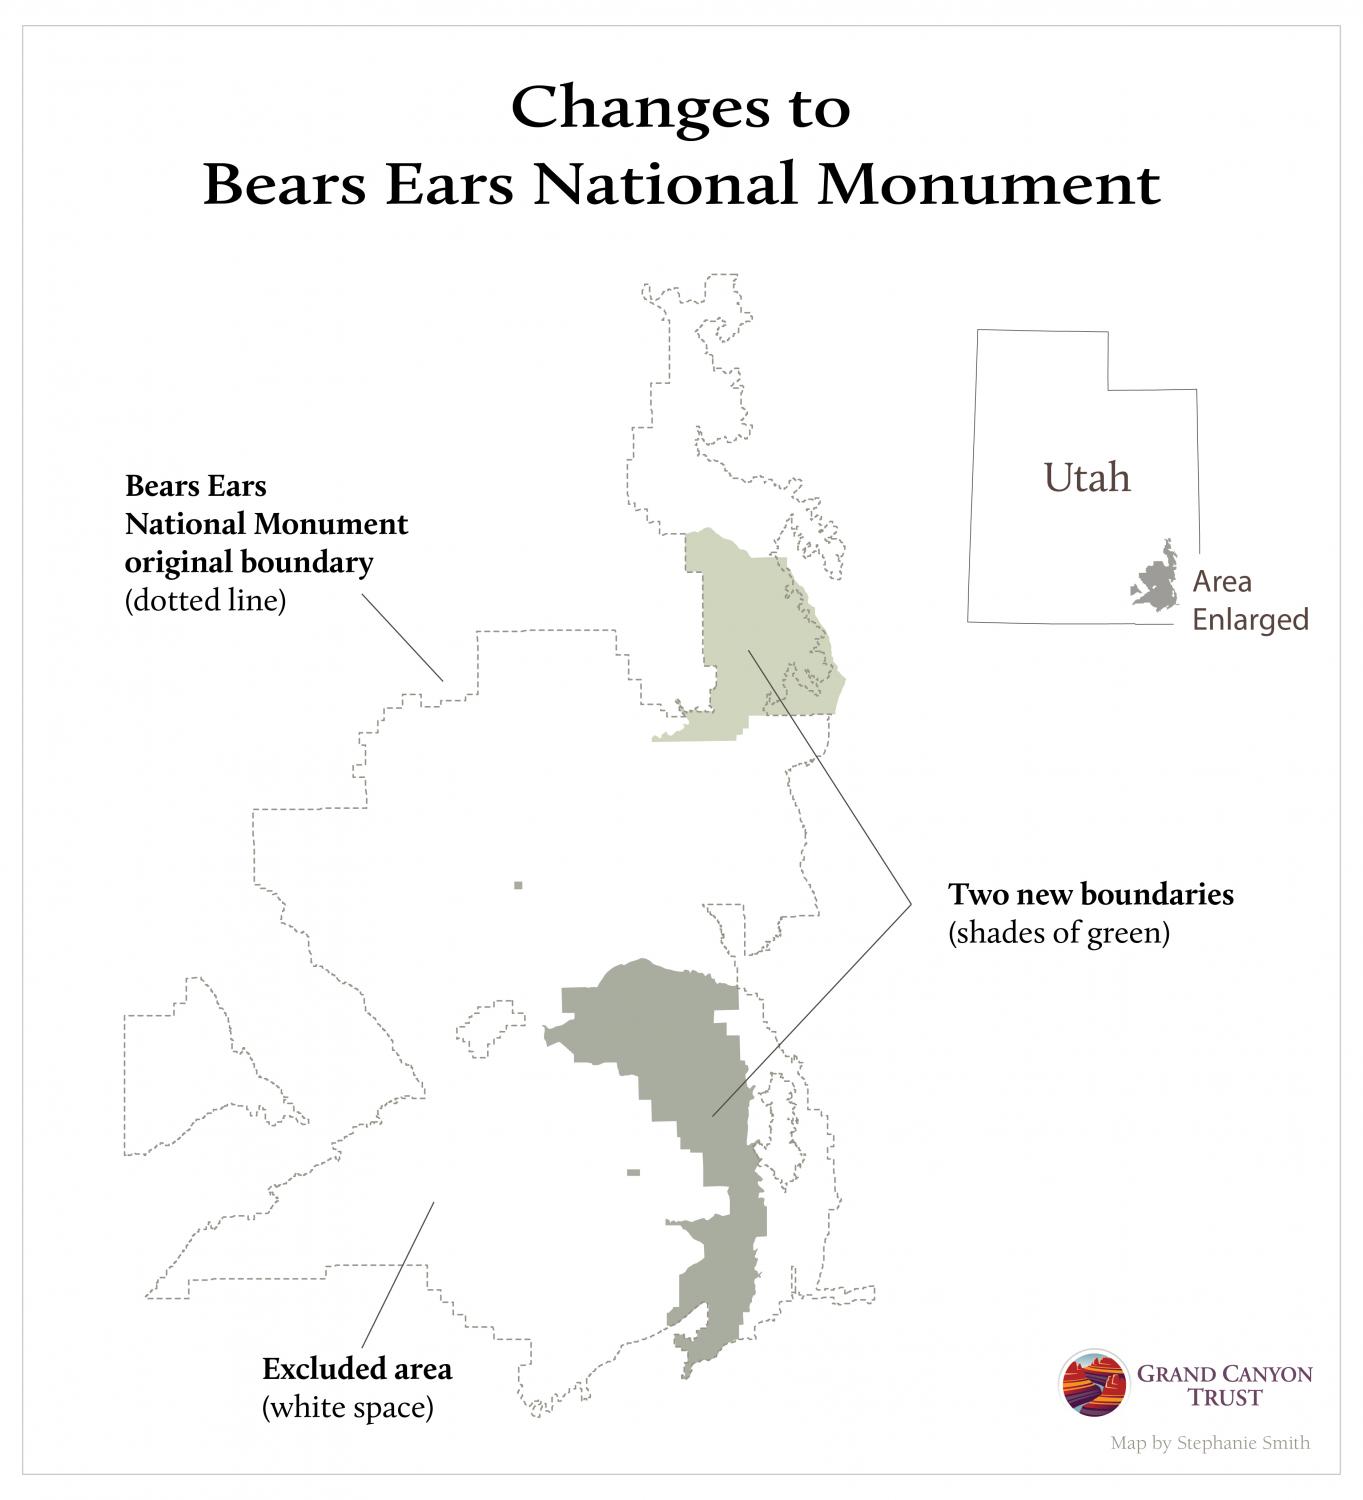 Map showing the excluded areas in Bears Ears National Monument.